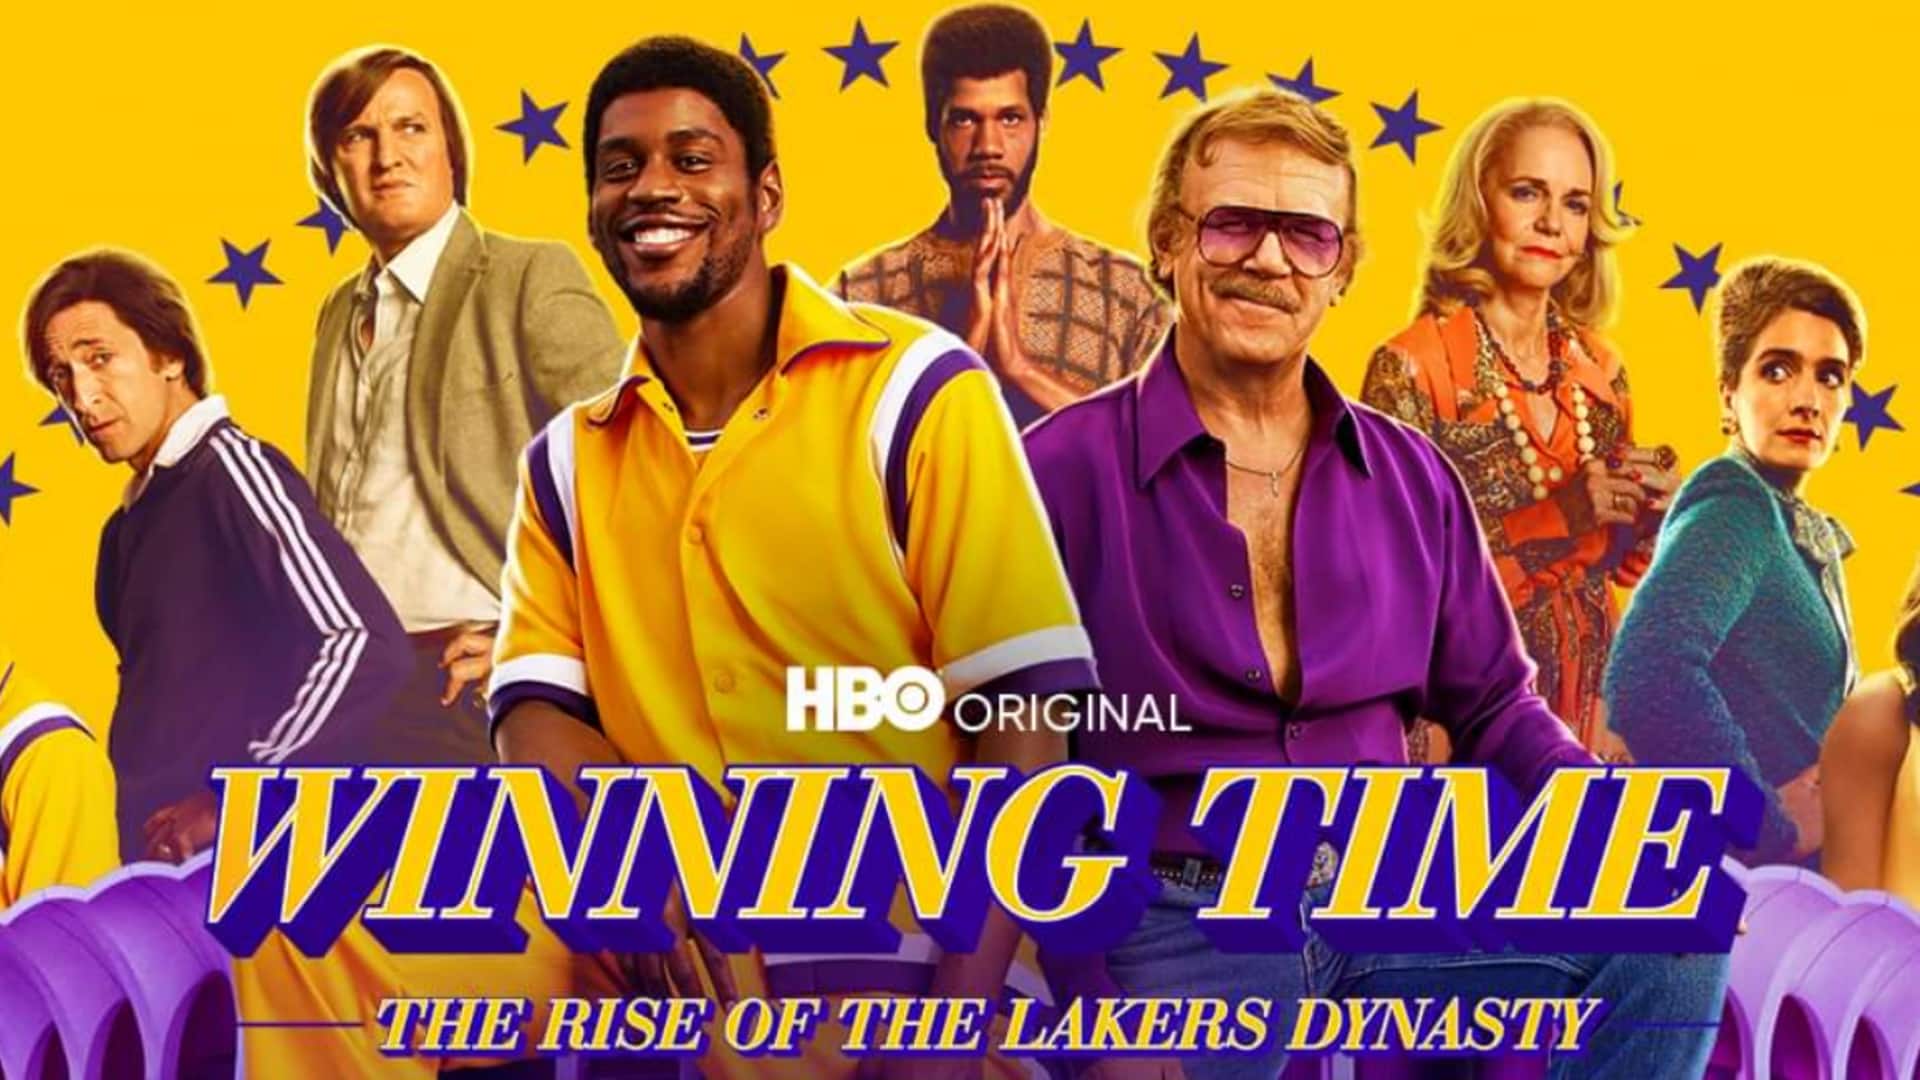 HBO's 'Winning Time' S03 not happening, creator Max Borenstein confirms 